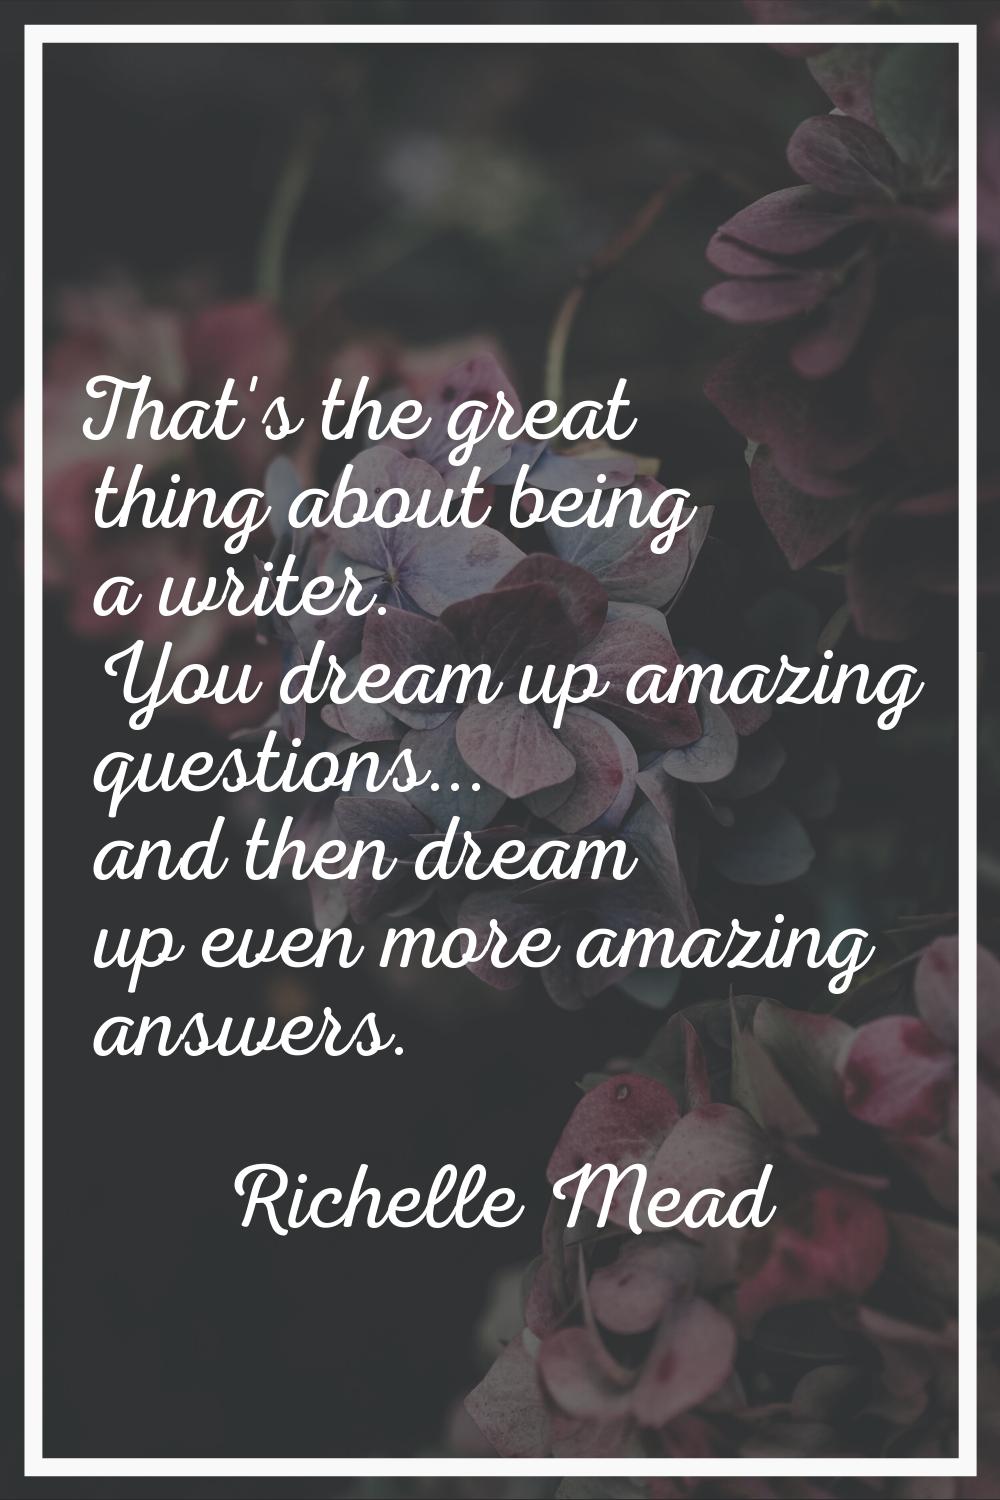 That's the great thing about being a writer. You dream up amazing questions... and then dream up ev